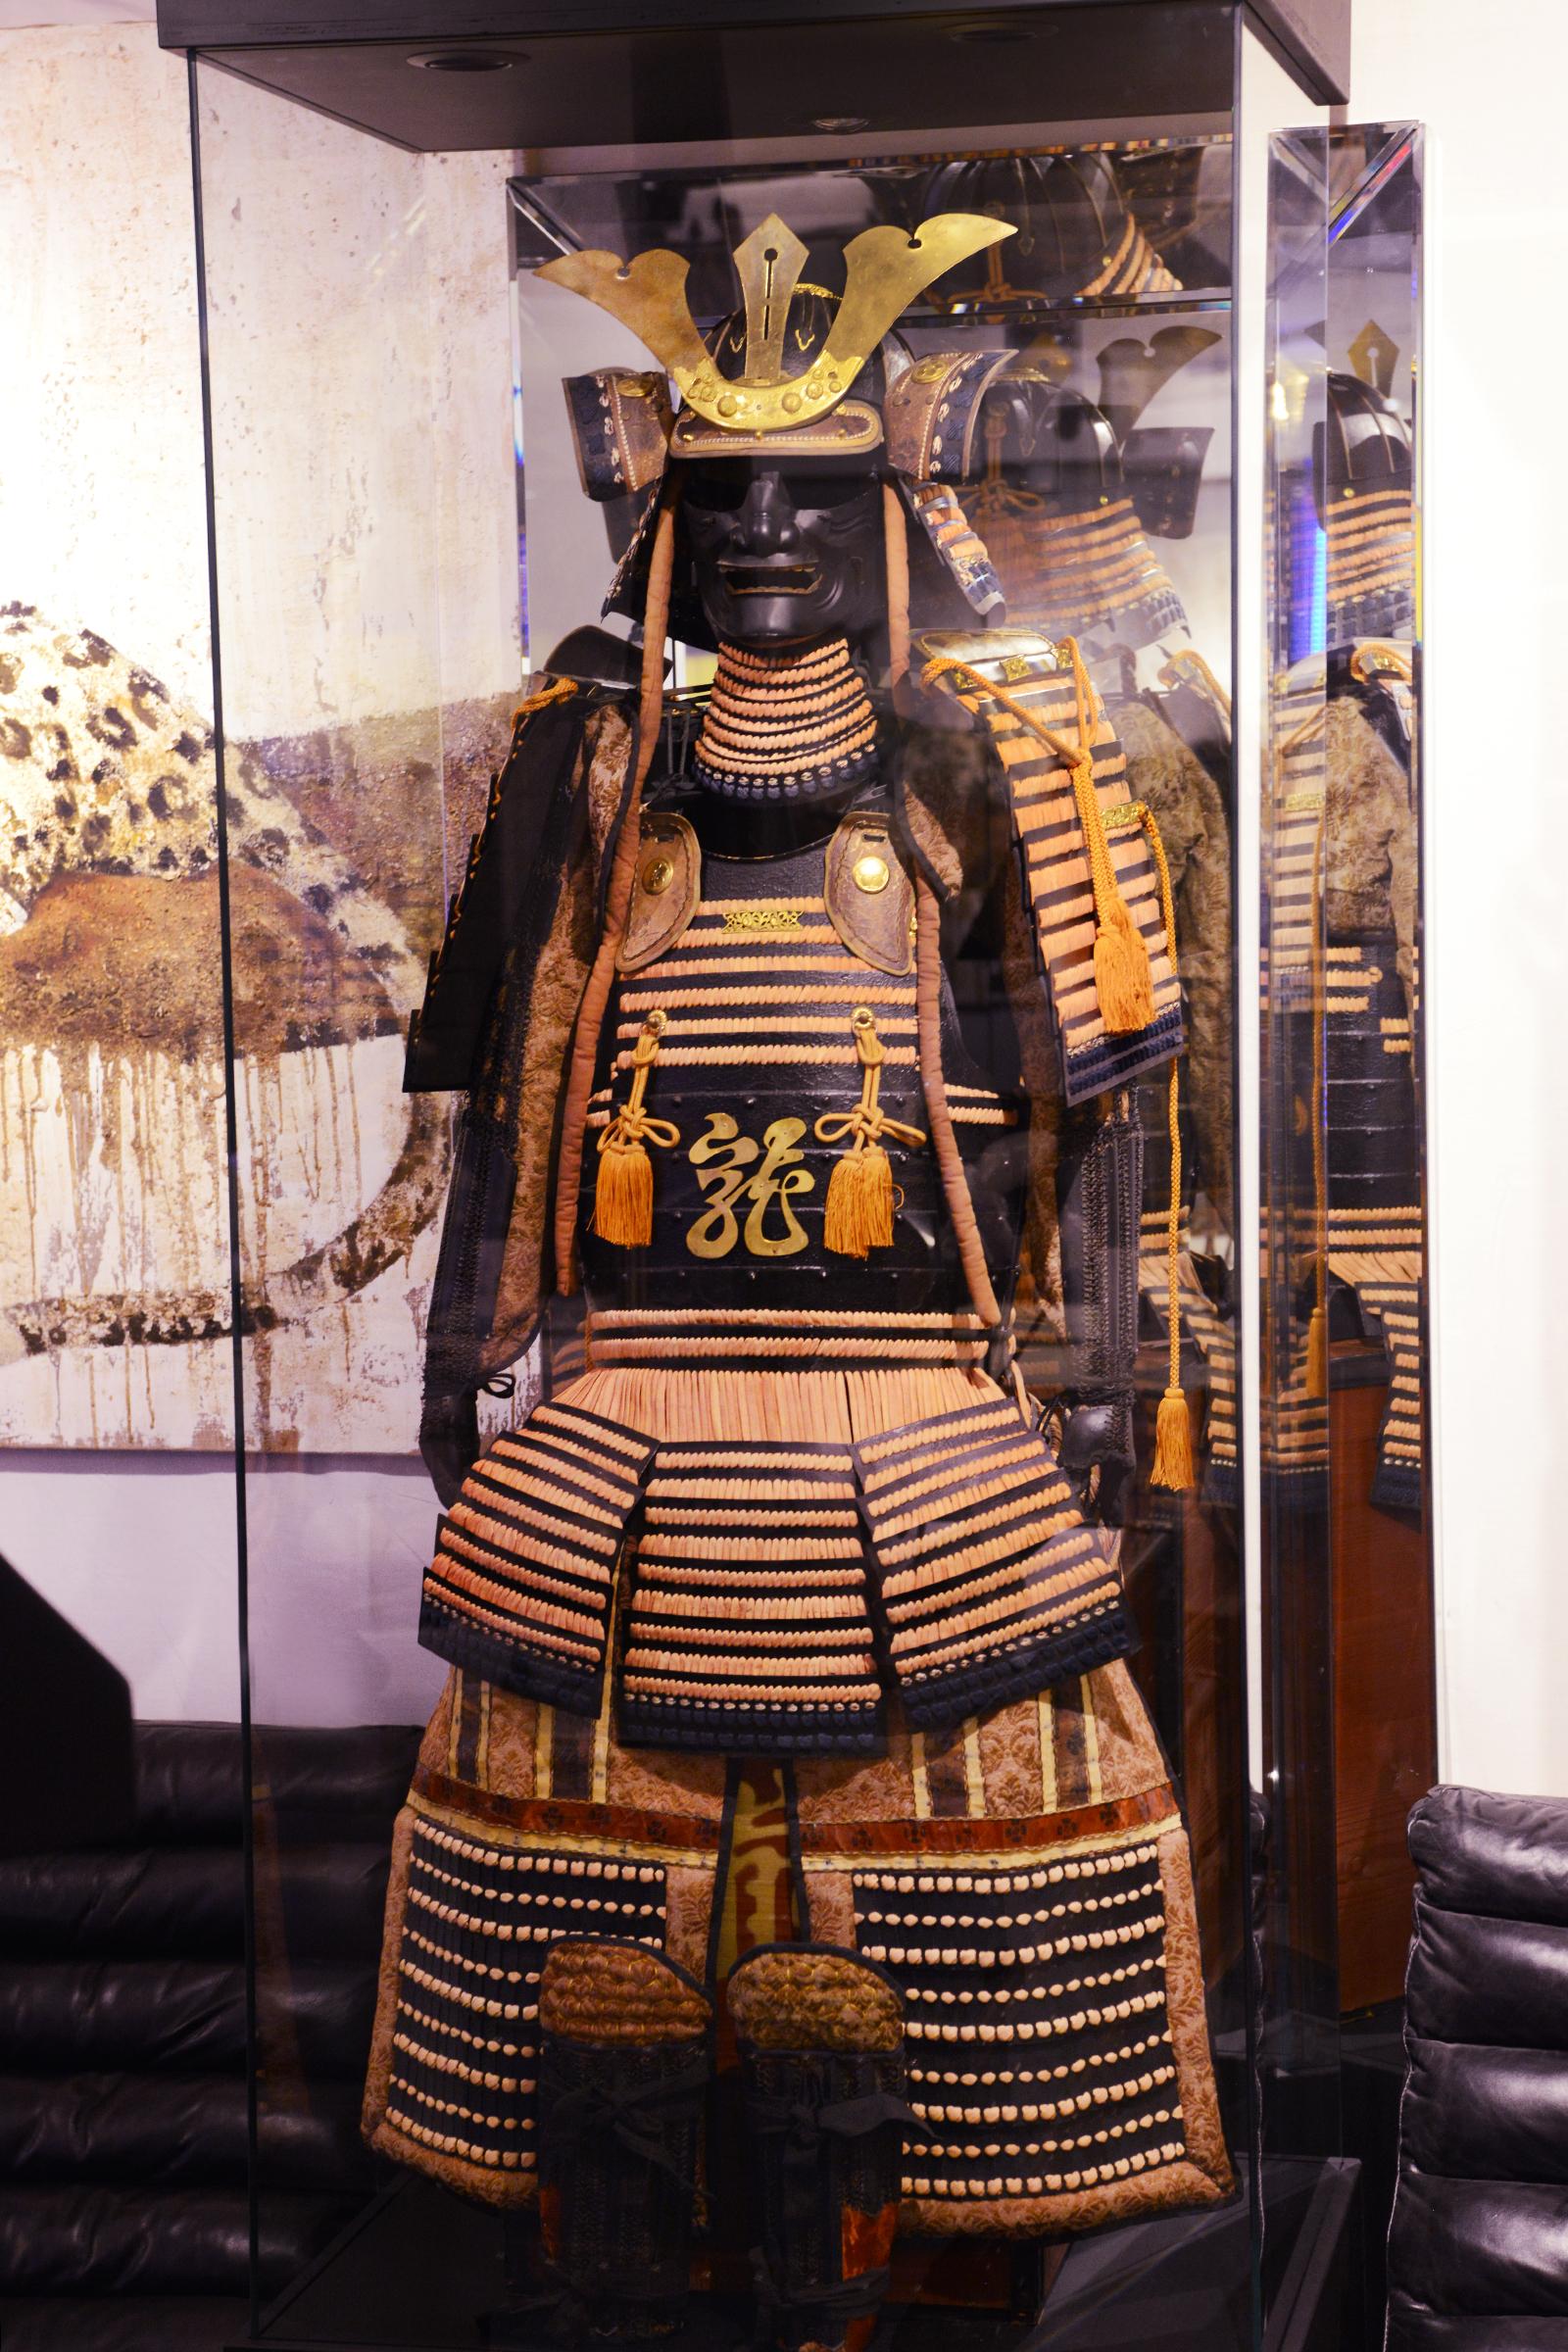 Samuraï Armor, ceremonial armor,
with handcrafted helmet and protects.
Made with original japanese fabric only use for
samuraï armor confection, with solid brass and
metal details, armor with minor structural damages 
due to time and